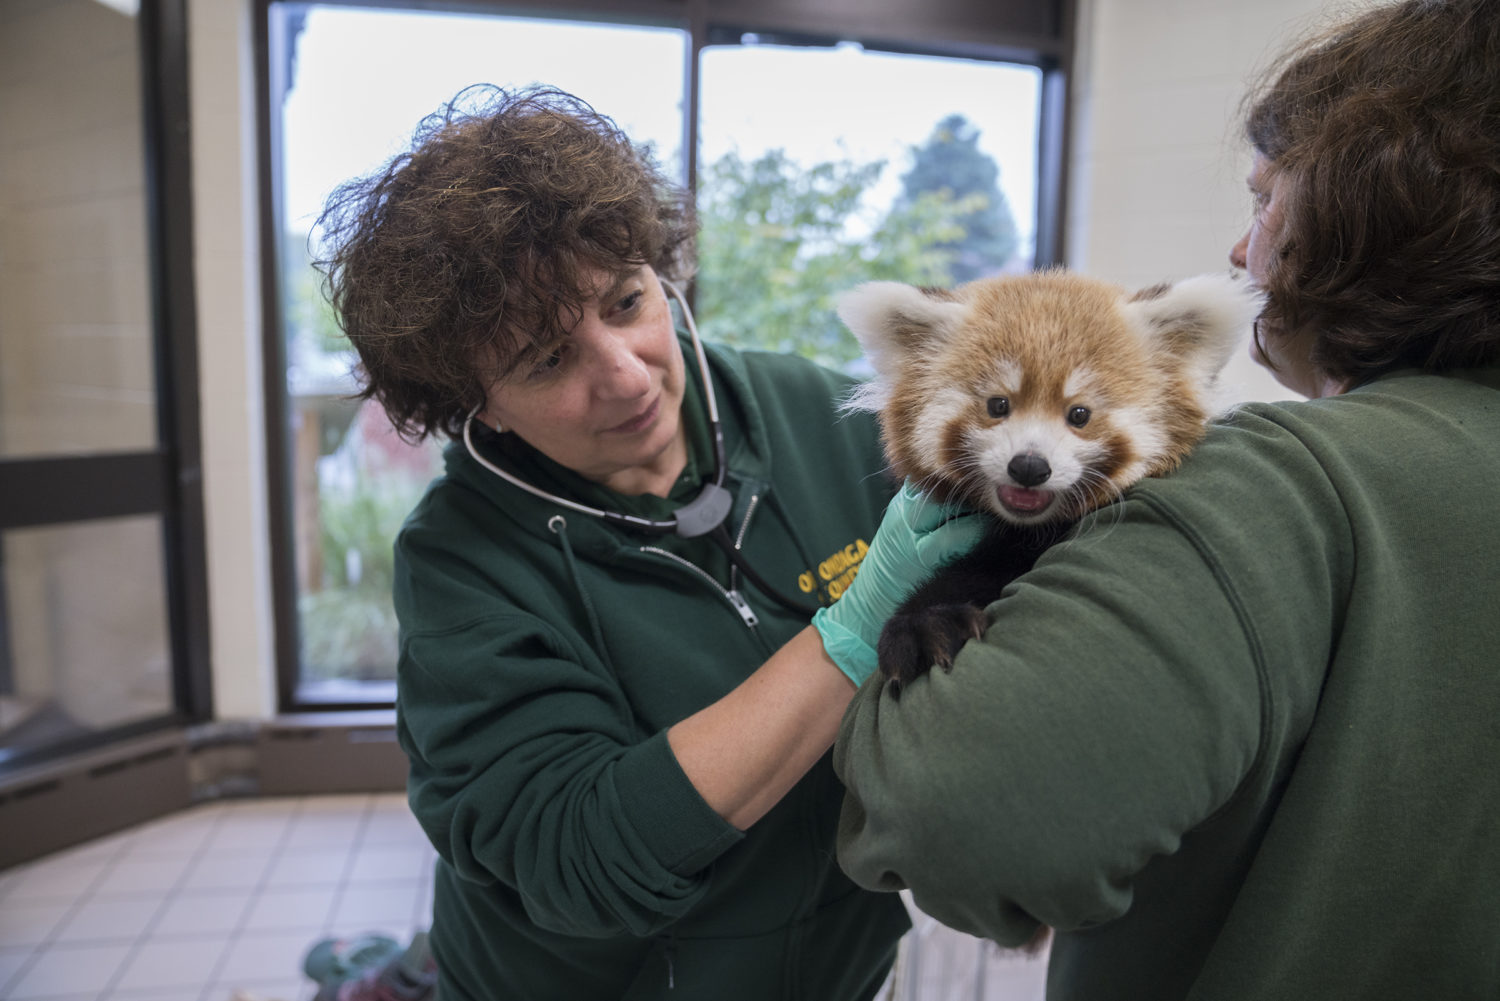 Dr. Noha Abou-Madi examines a baby red panda at the Rosamond Gifford Zoo in Syracuse, New York.